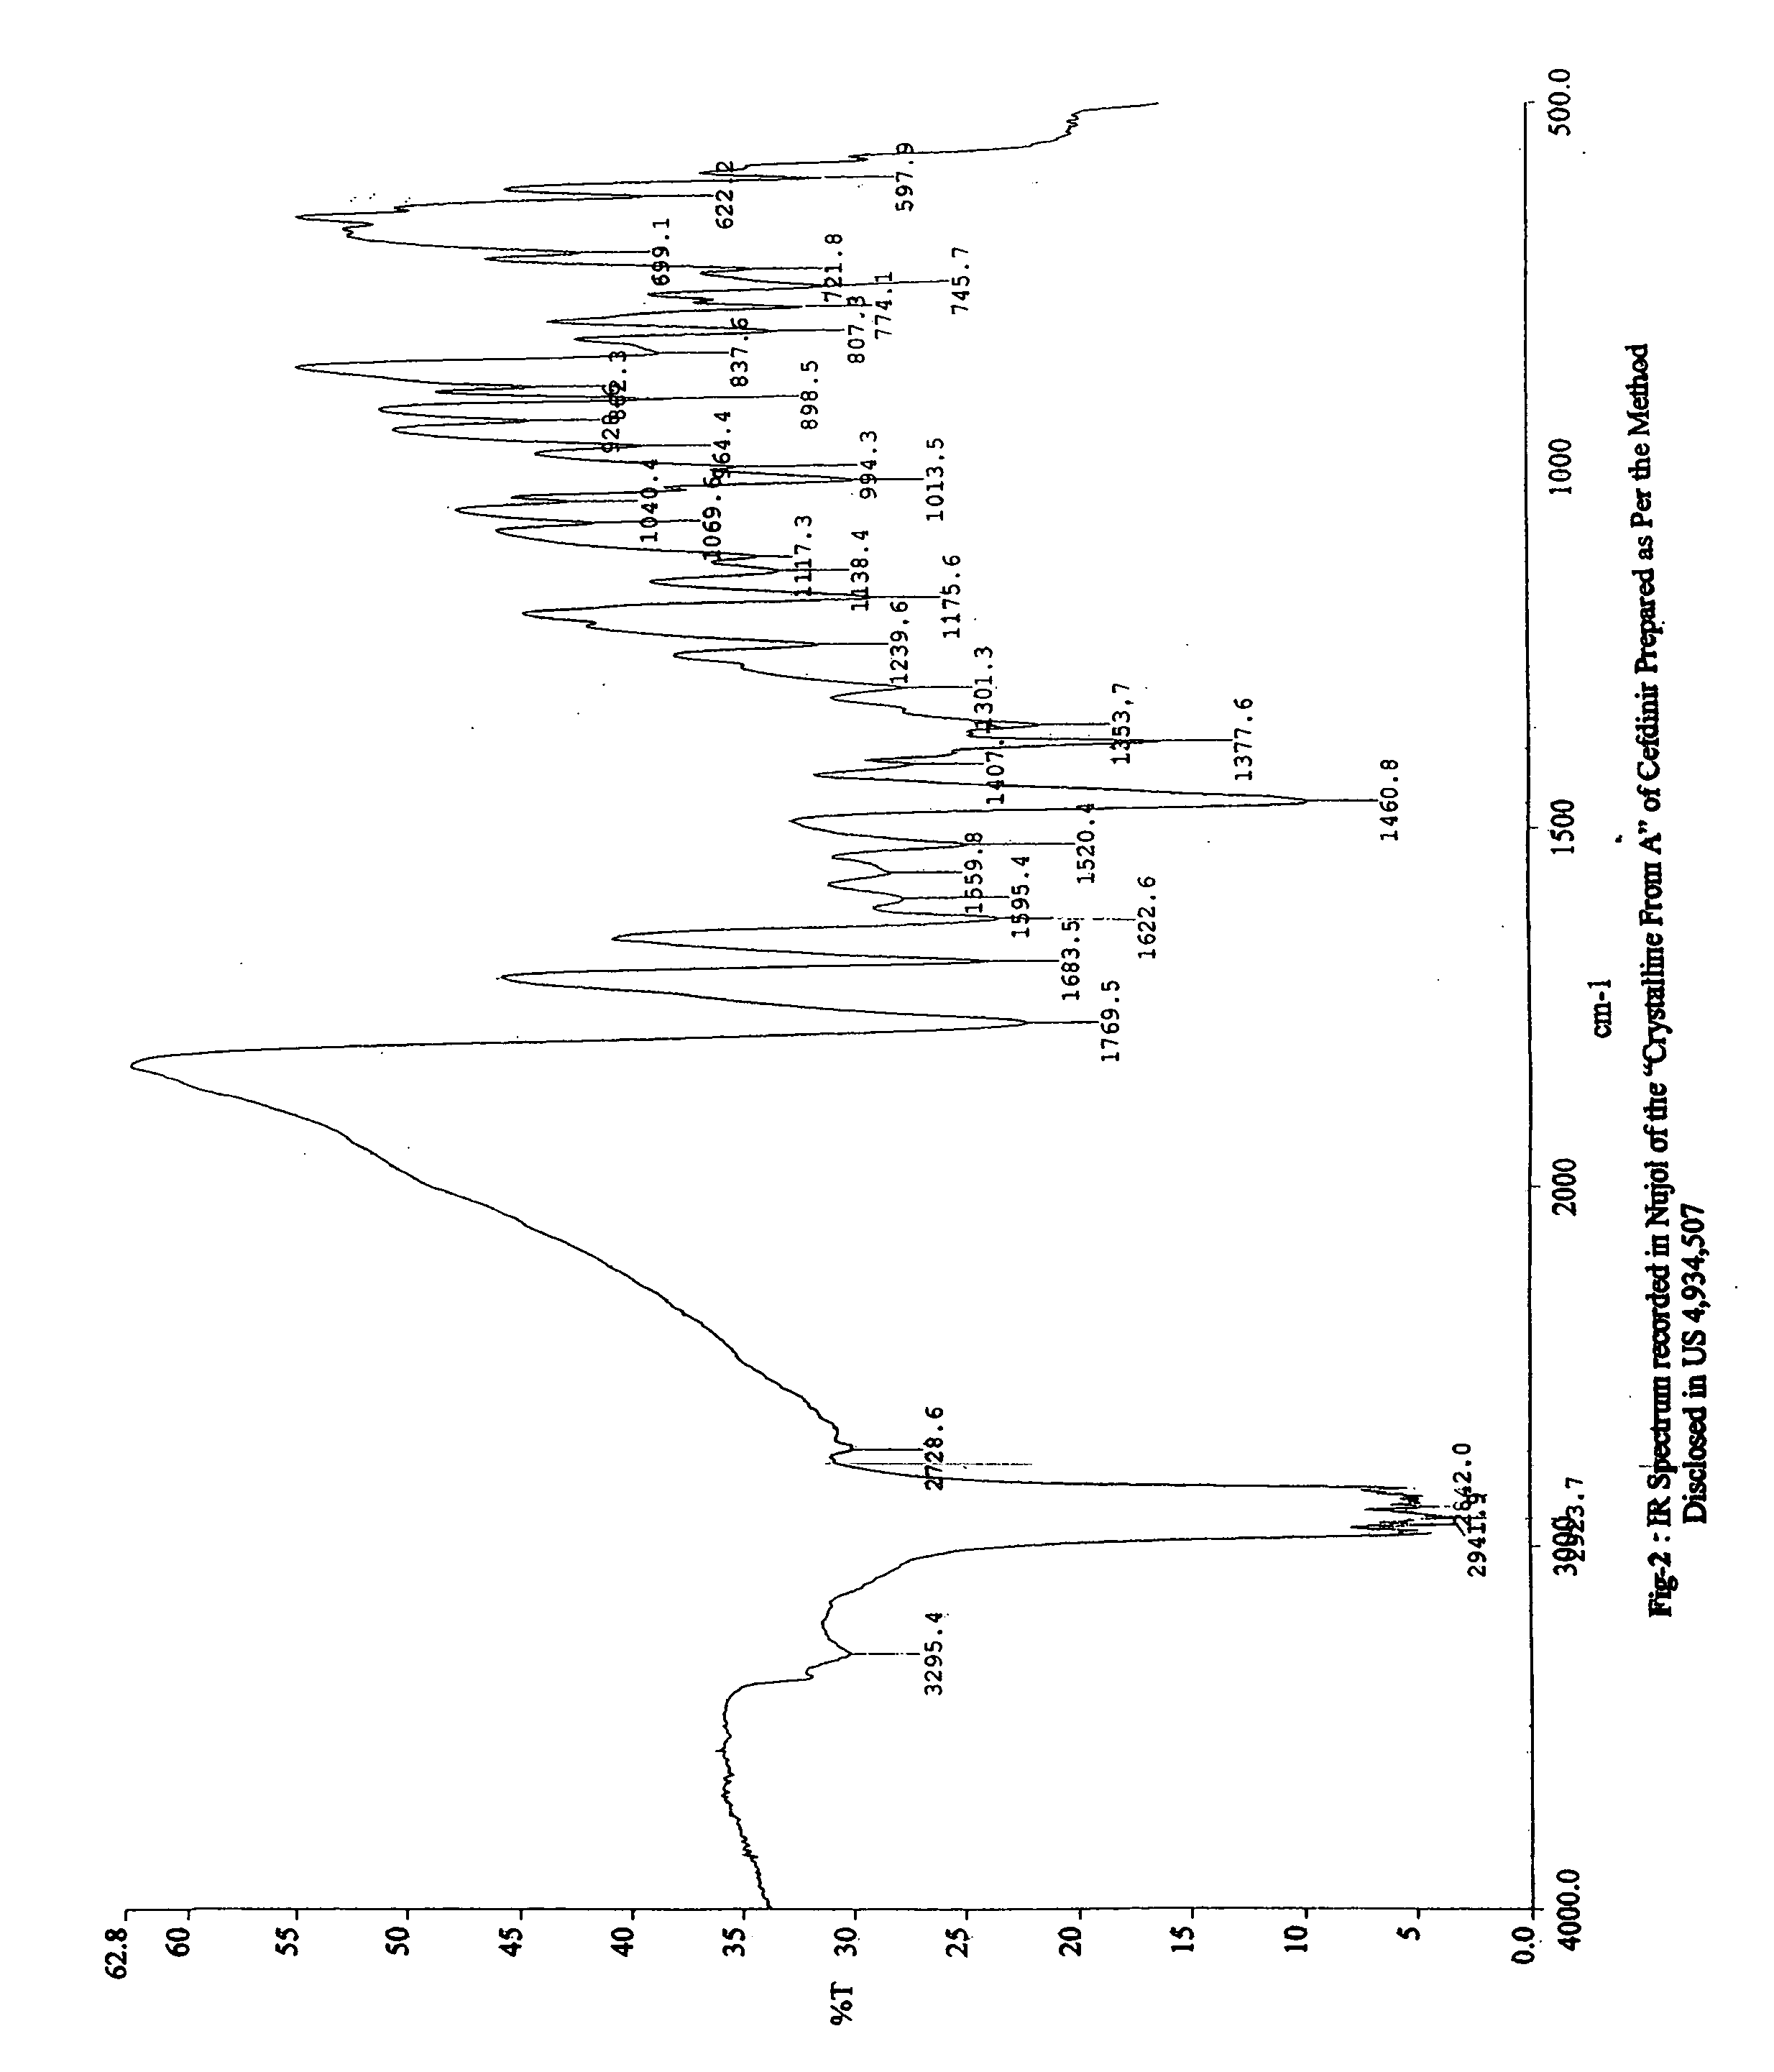 Stable bioavailable crystalline form of cefdinir and a process for the preparation thereof